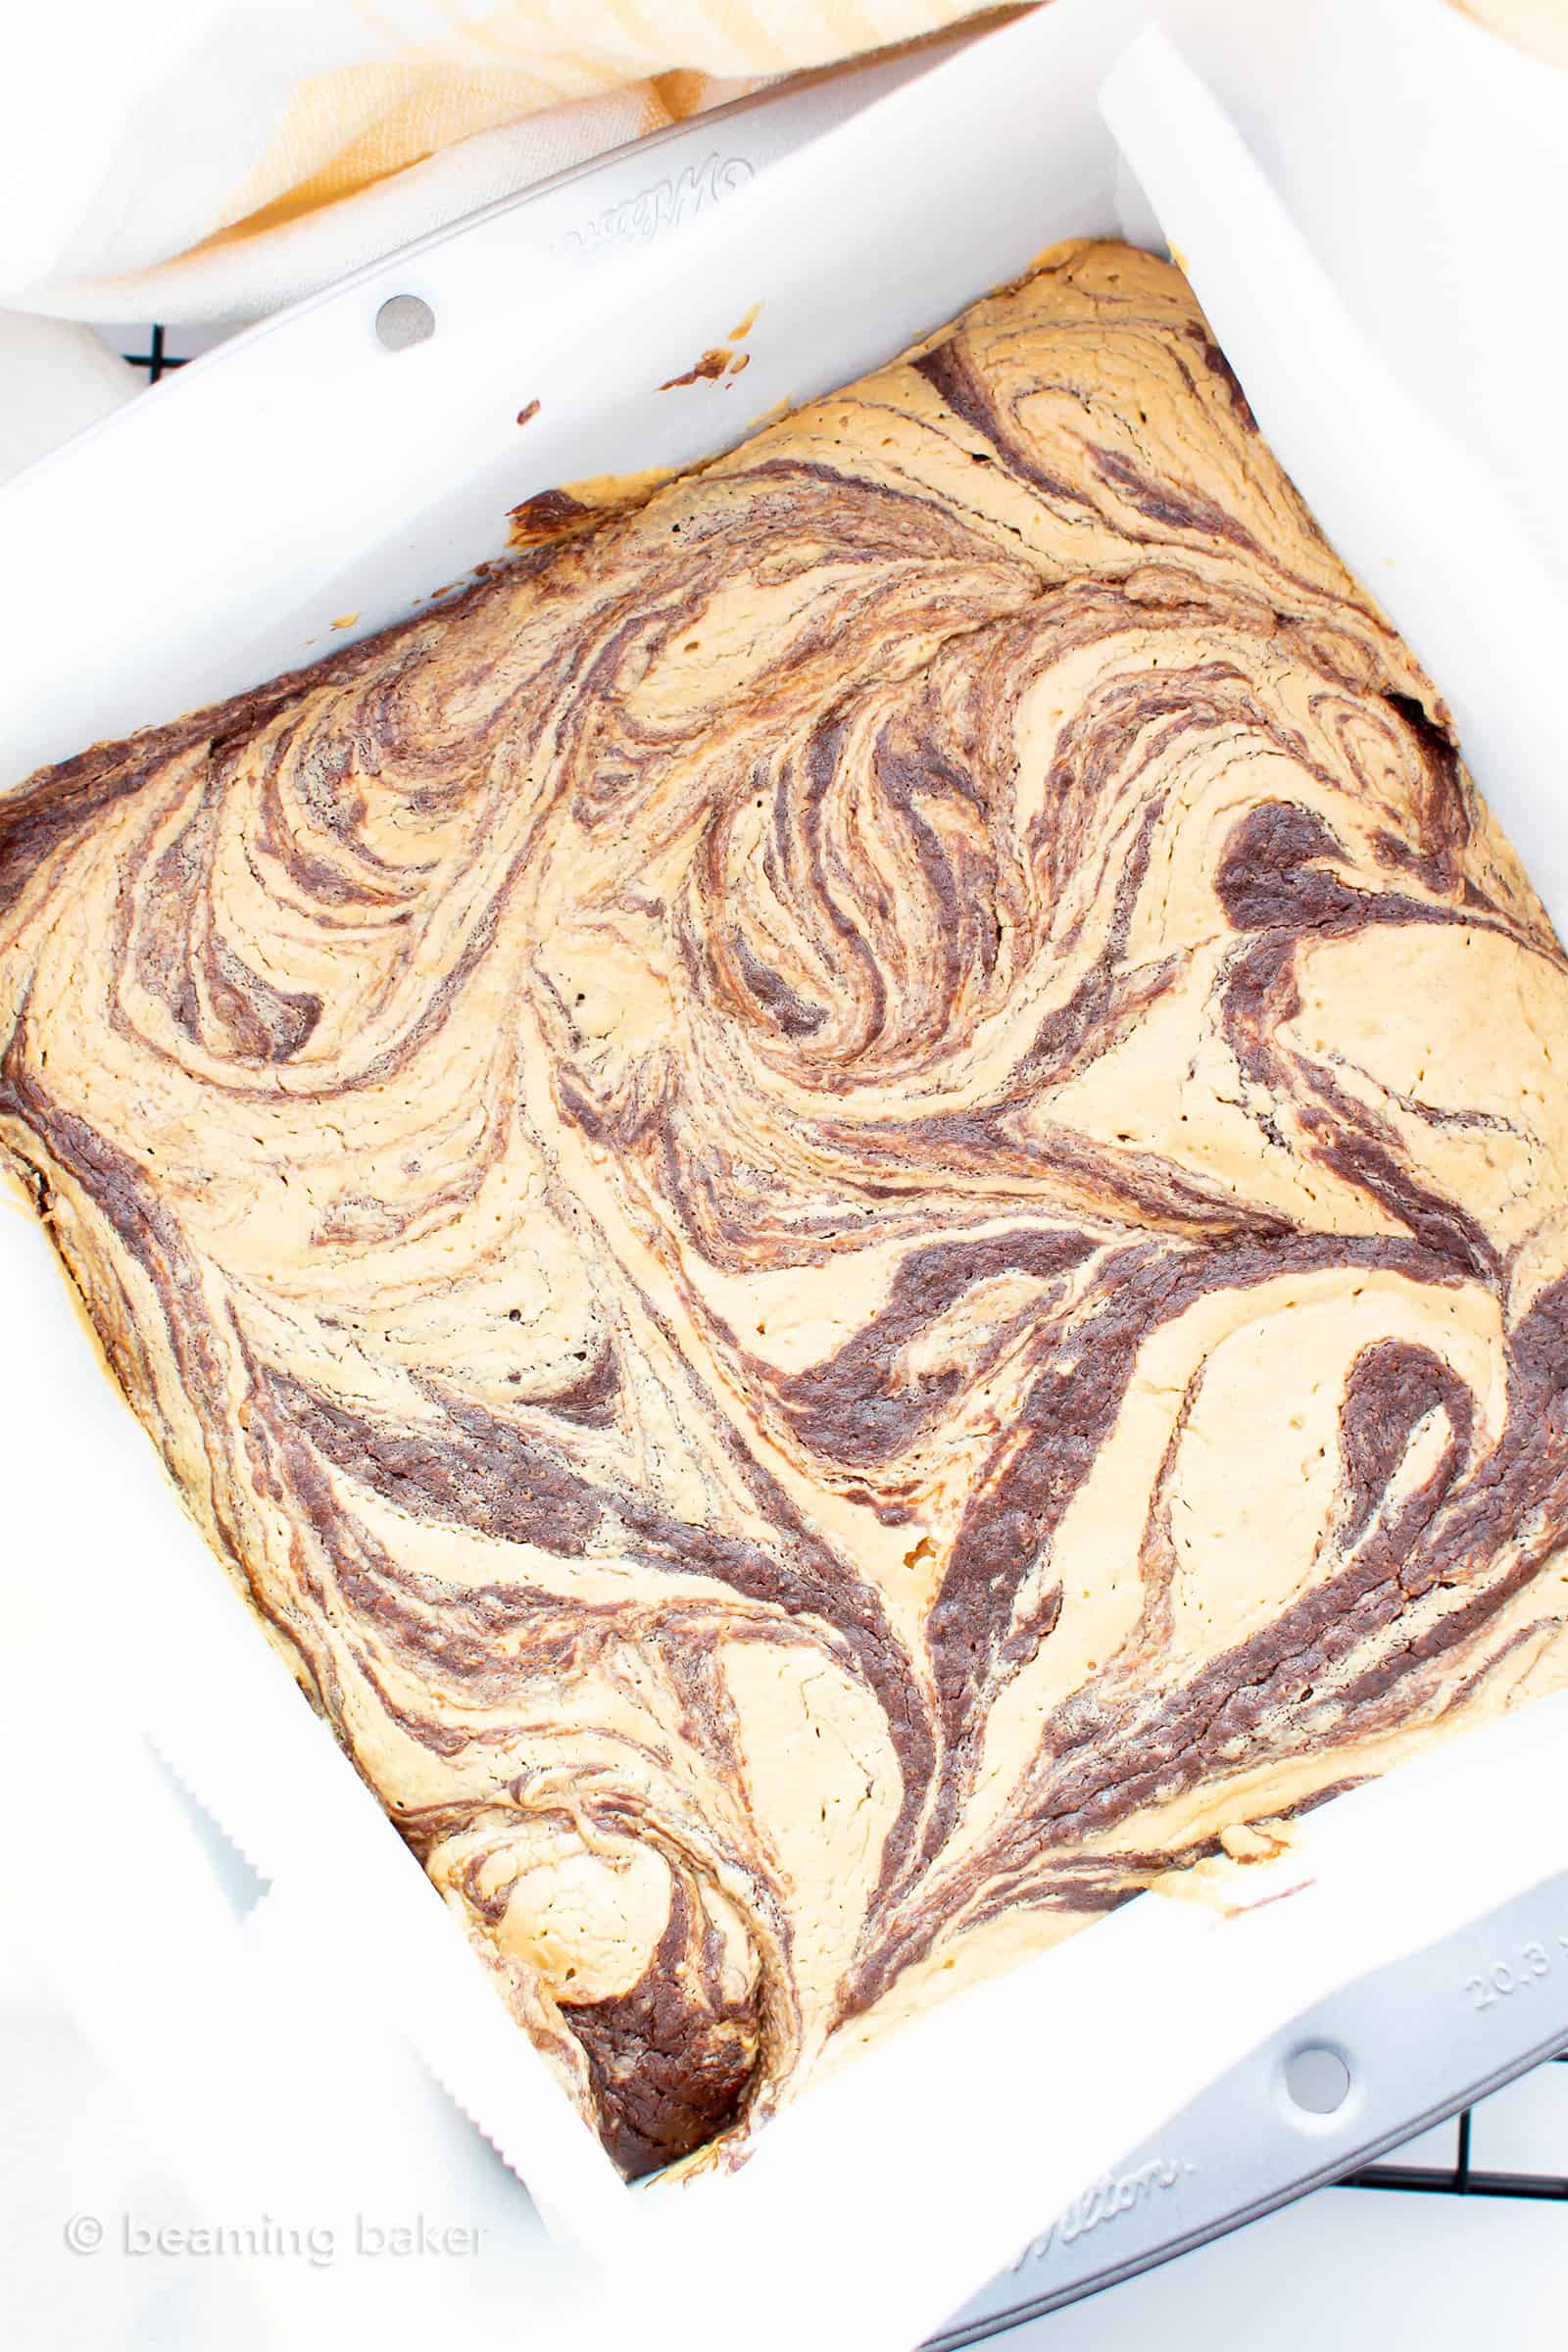 Fudgy Vegan Peanut Butter Swirl Brownies (Gluten Free): this vegan gluten free brownies recipe is made from scratch & easy! It’s the fudgiest chocolate peanut butter swirl brownies ever—with thick ribbons of peanut butter and rich, moist brownie flavor! #Vegan #Brownies #GlutenFree #DairyFree #PeanutButter | Recipe at BeamingBaker.com